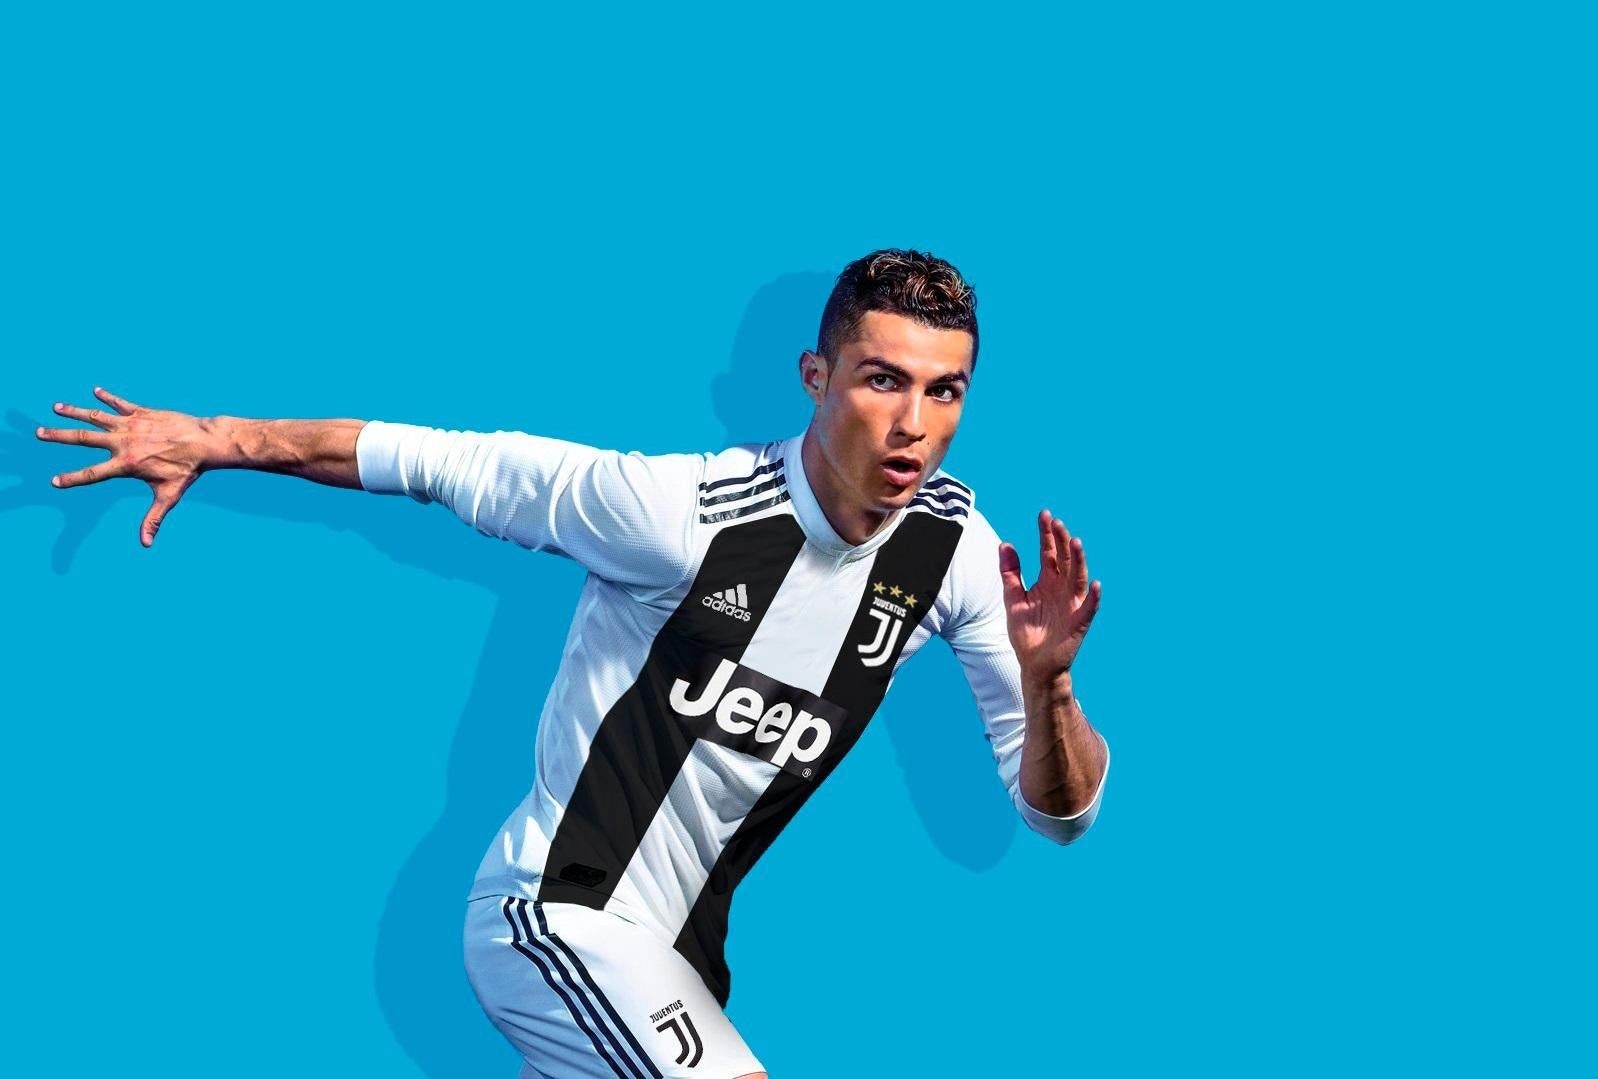 The countdown has begun for the top 100 player ratings on Fifa 19